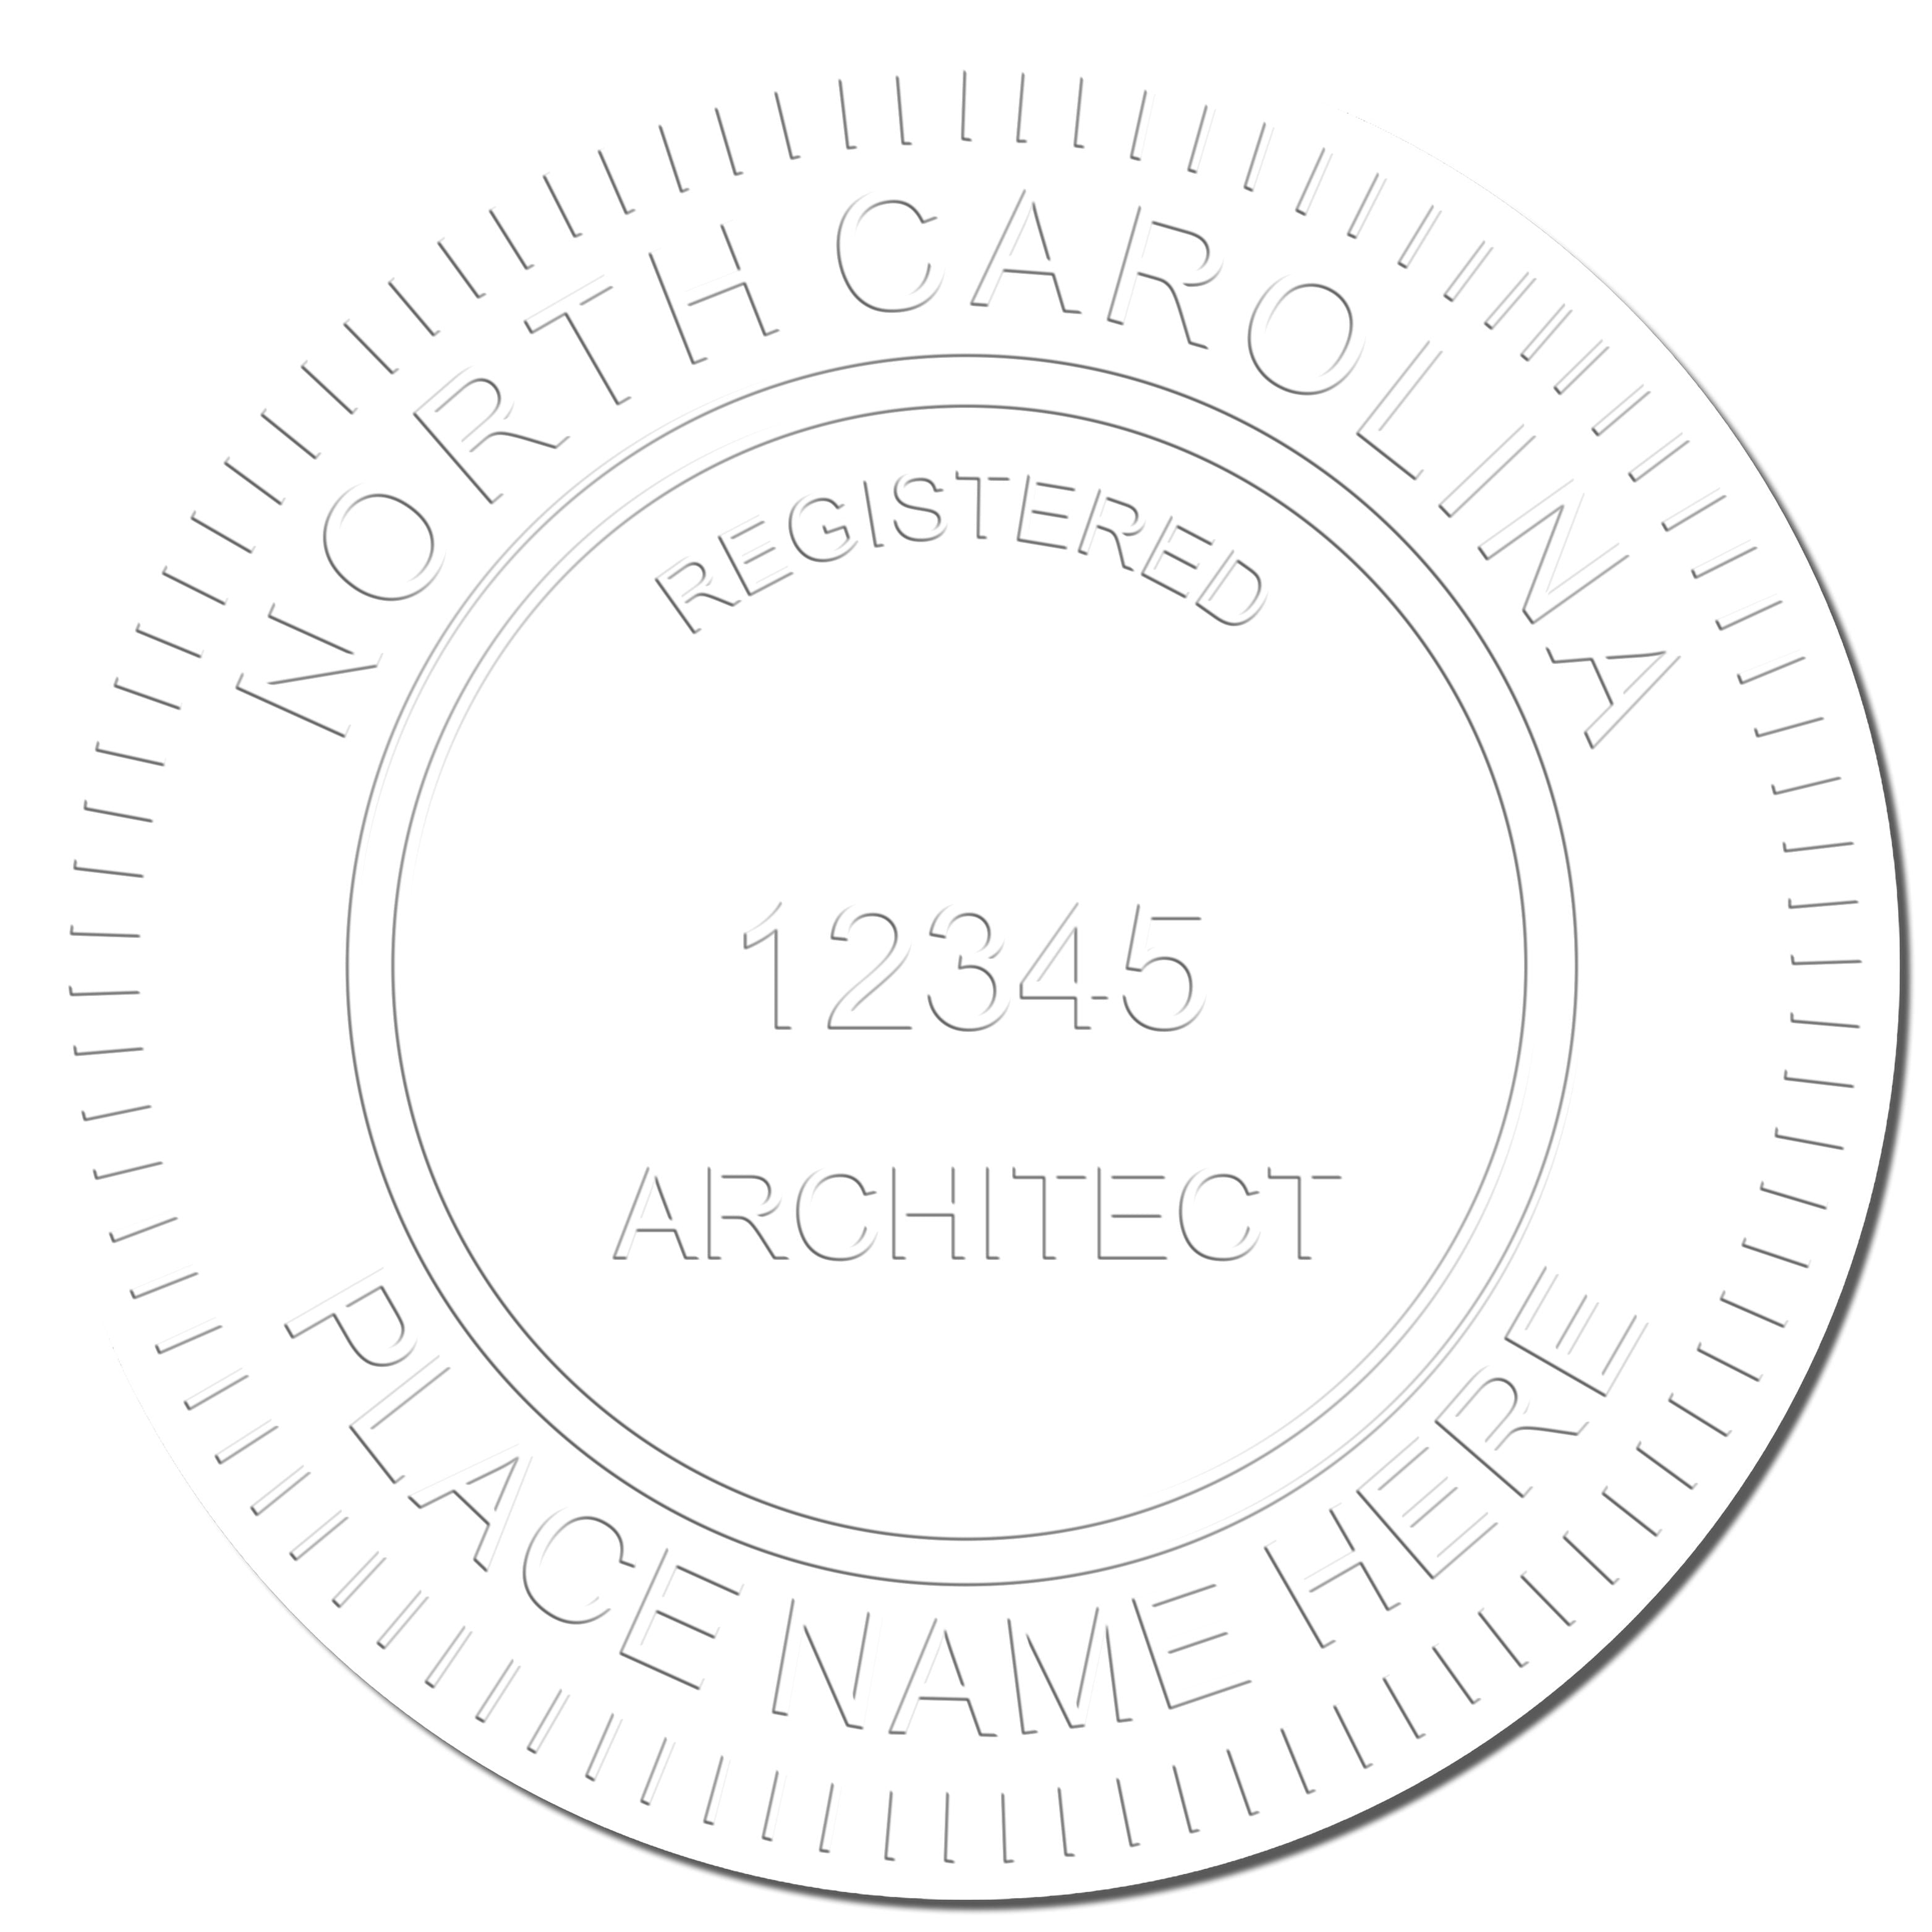 This paper is stamped with a sample imprint of the Heavy Duty Cast Iron North Carolina Architect Embosser, signifying its quality and reliability.